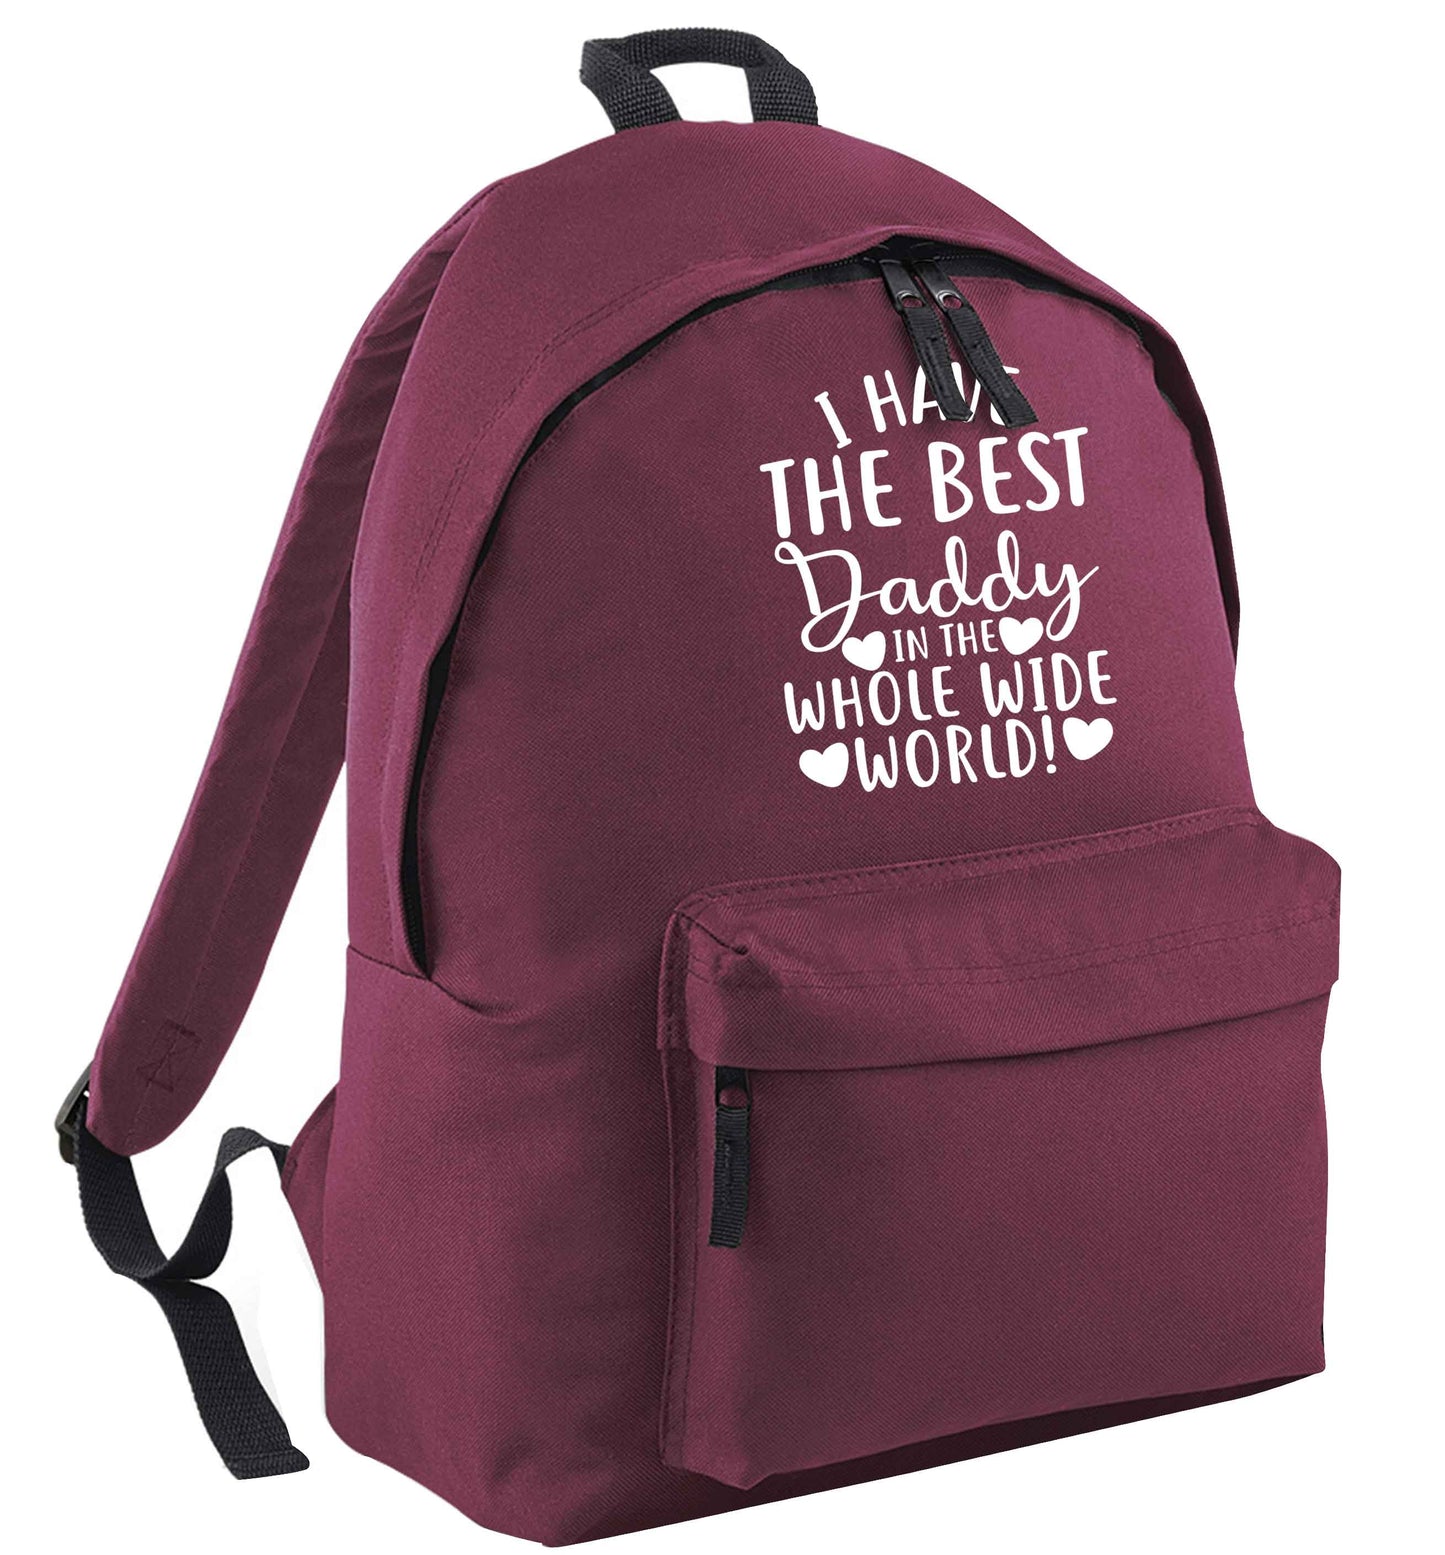 I have the best daddy in the whole wide world | Children's backpack